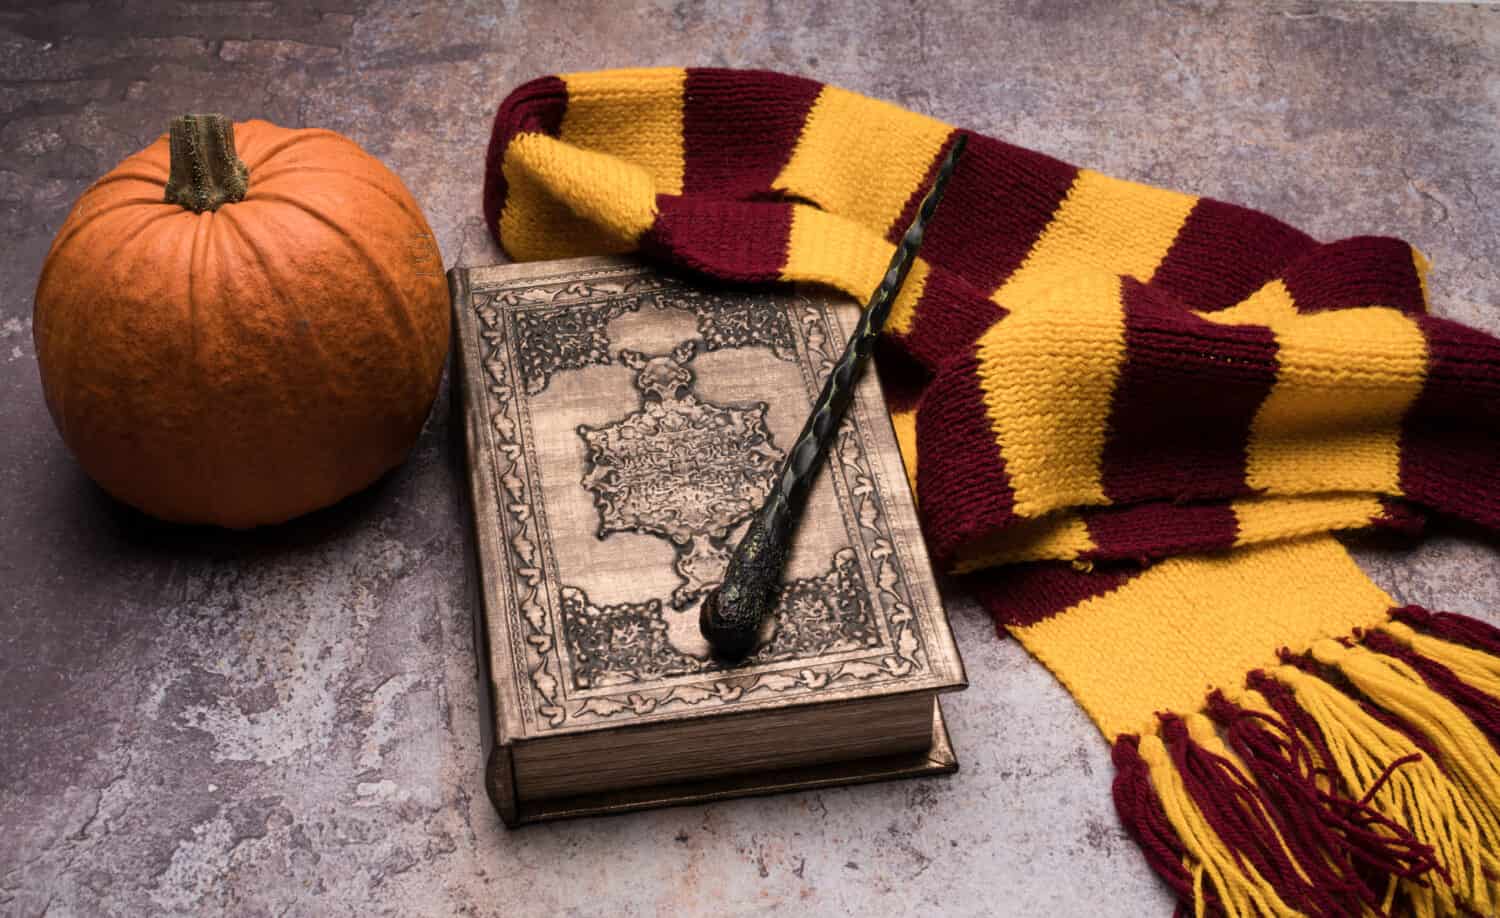 Subjects of the school of magic. Scarf, magic wand, book of spells, pumpkin